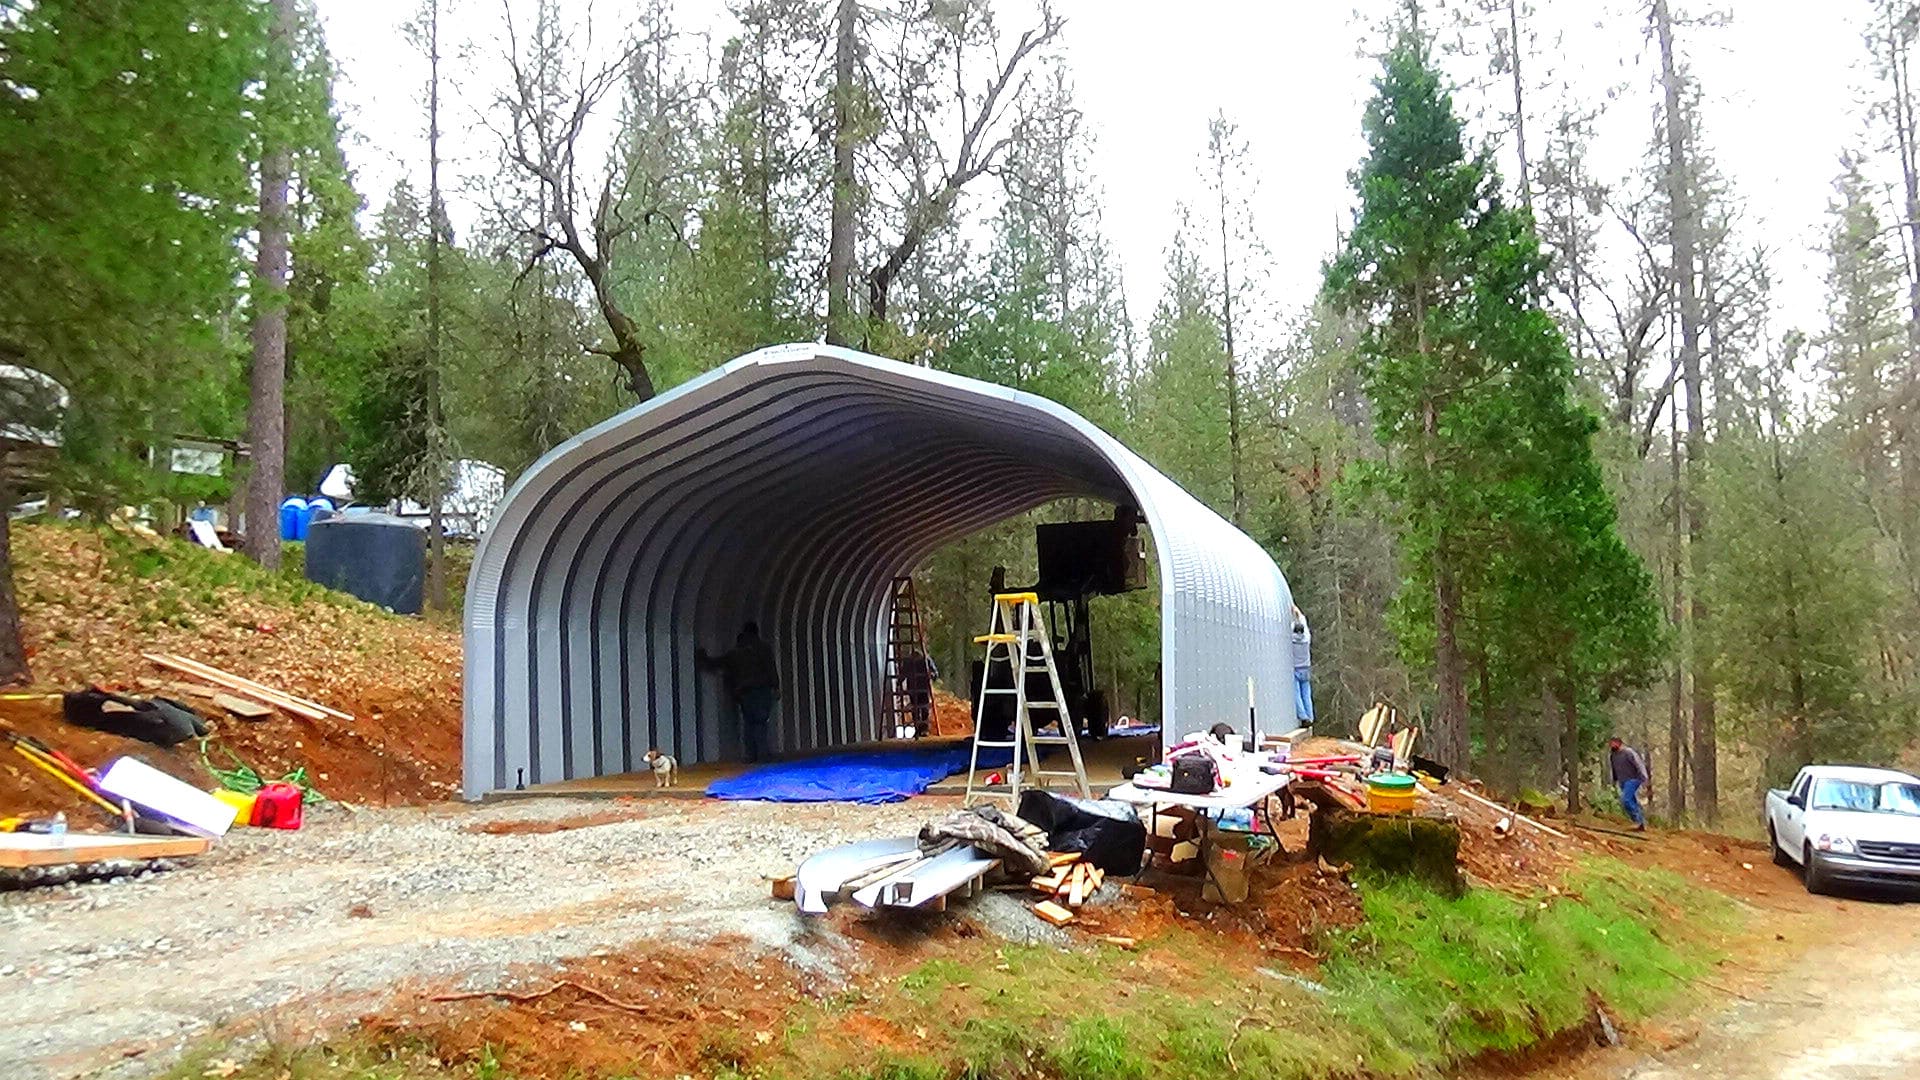 working site with open-ended quonset hut mid-construction